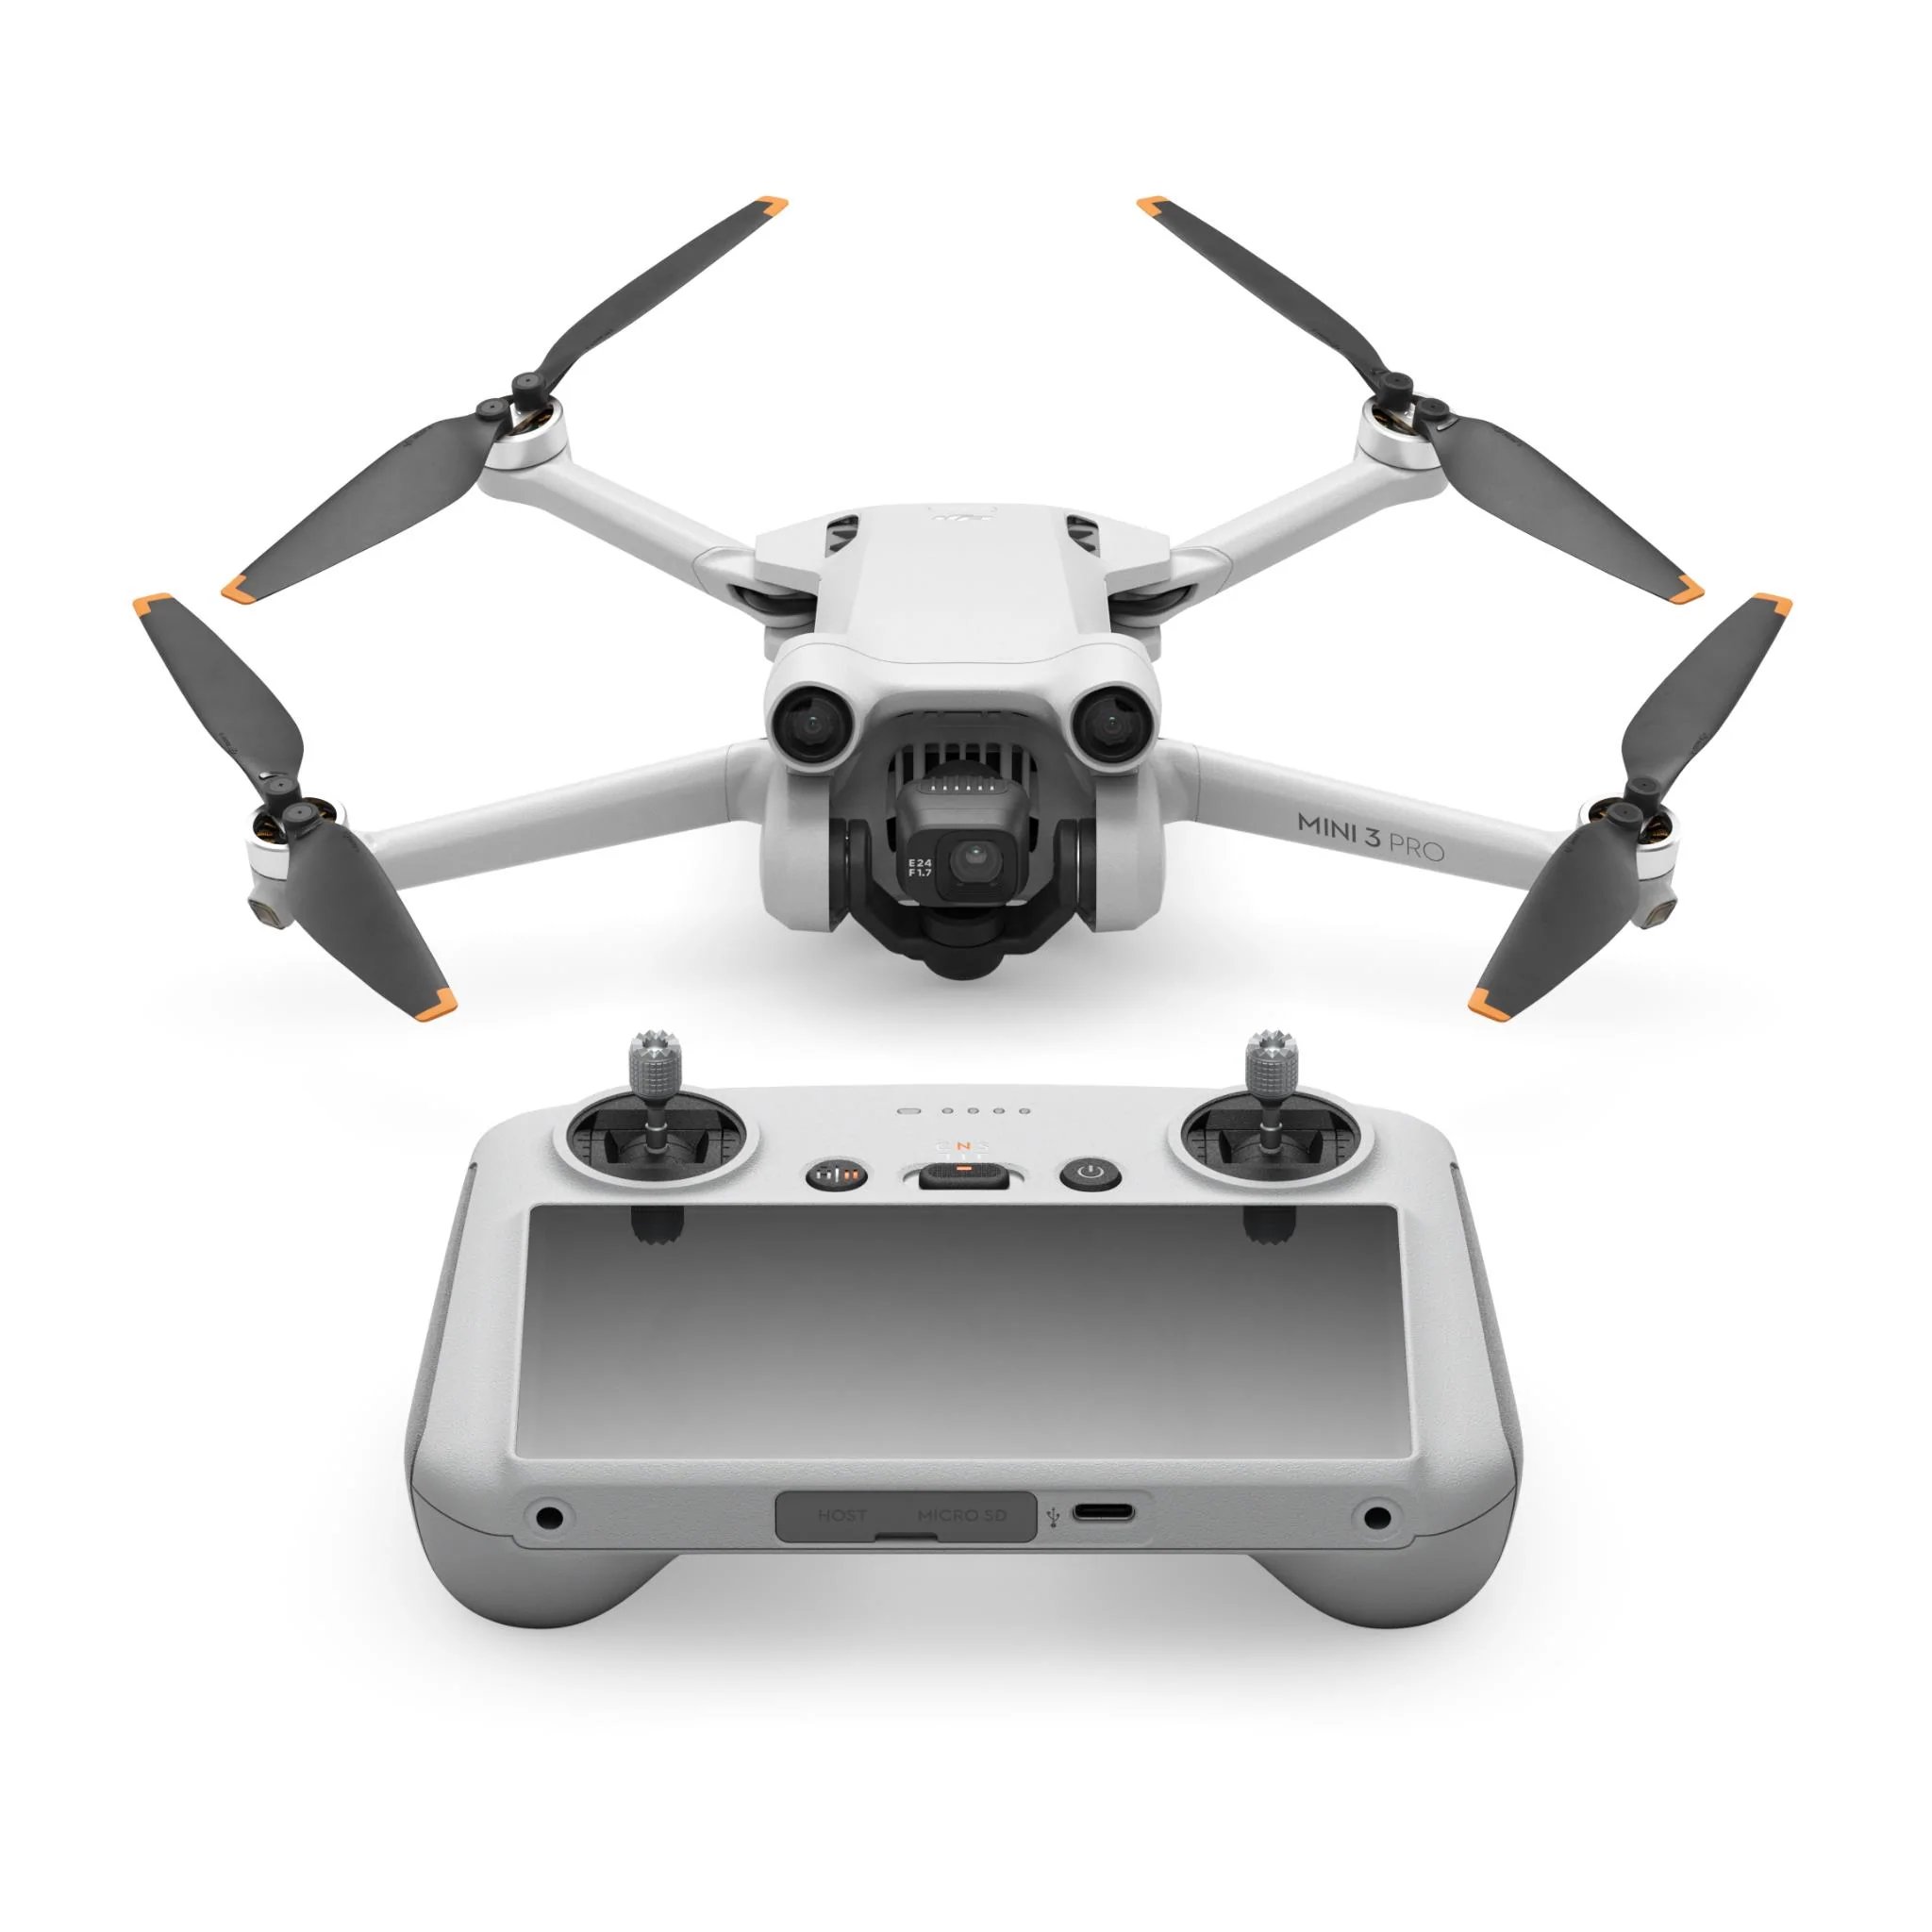 The DJI Mini Pro is another pick for our Father's Day gift guide.